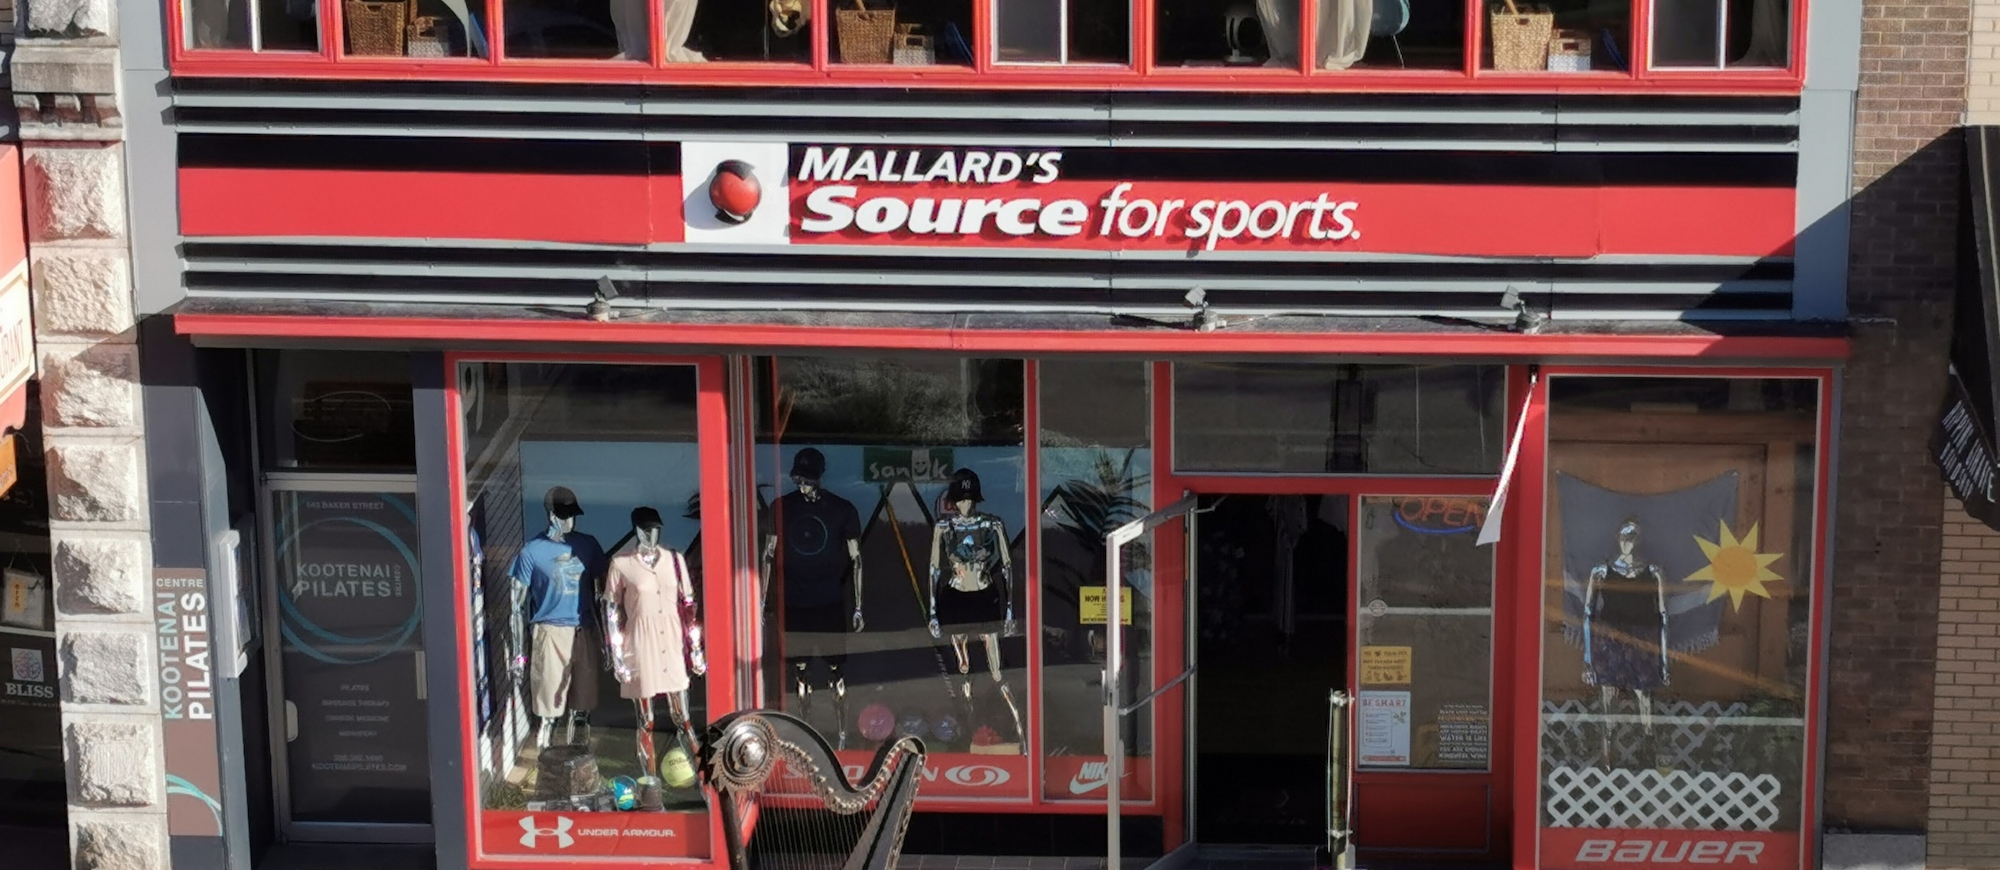 The outside of the Mallard's Source for Sports building on Baker Street in Nelson, BC